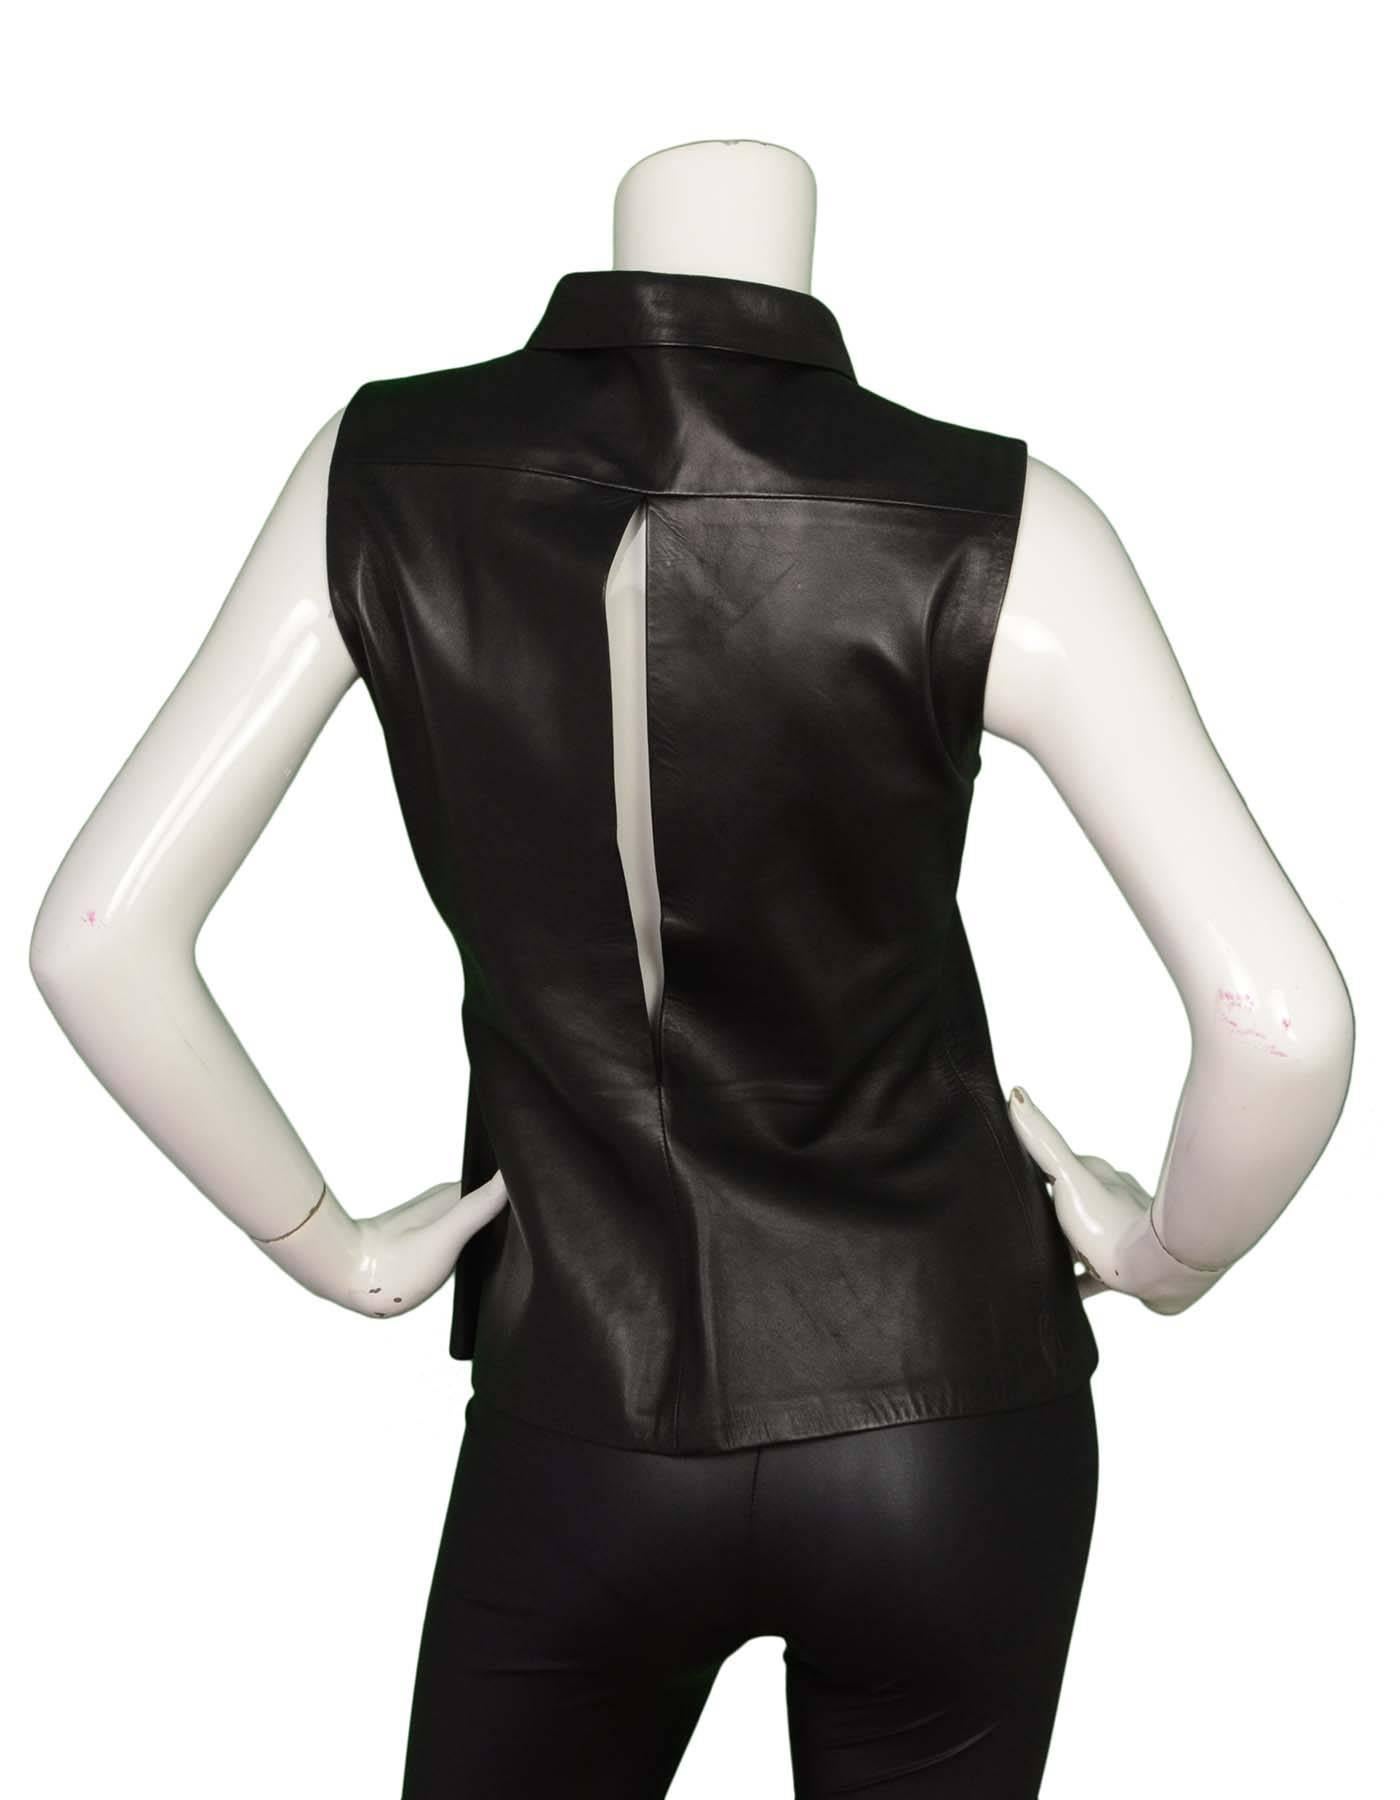 Jil Sander Black Leather Vest Sz 38
Features slit opening at back

Color: Black
Composition: 100% leather
Lining: None
Closure/Opening: Front button closure
Exterior Pockets: None
Interior Pockets: None
Overall Condition: Very good